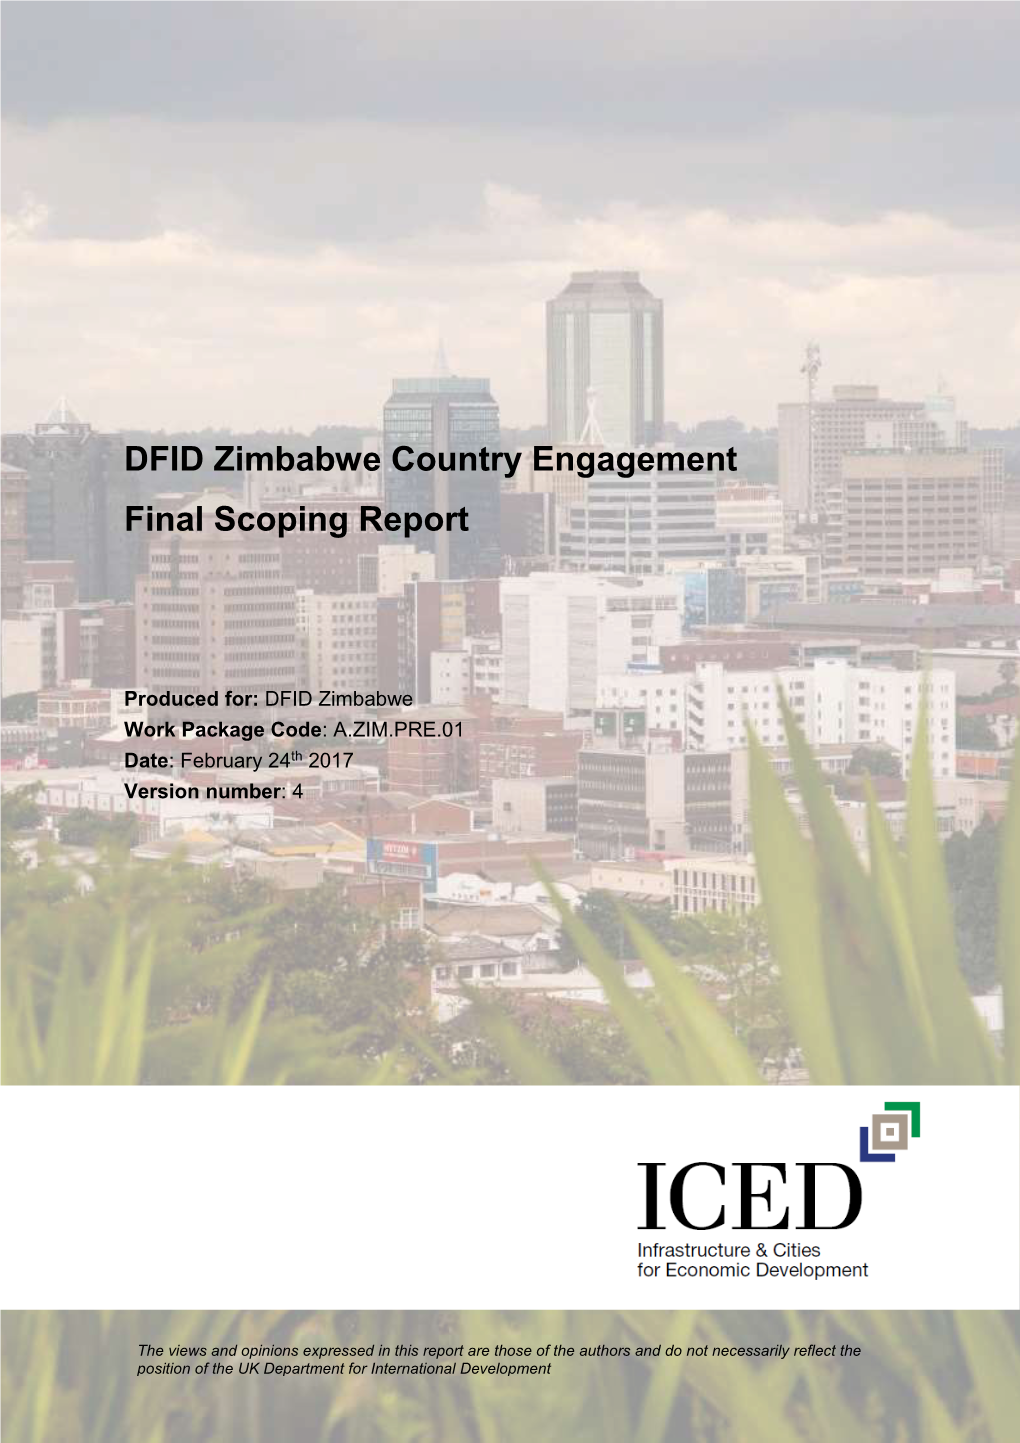 DFID Zimbabwe Country Engagement Final Scoping Report